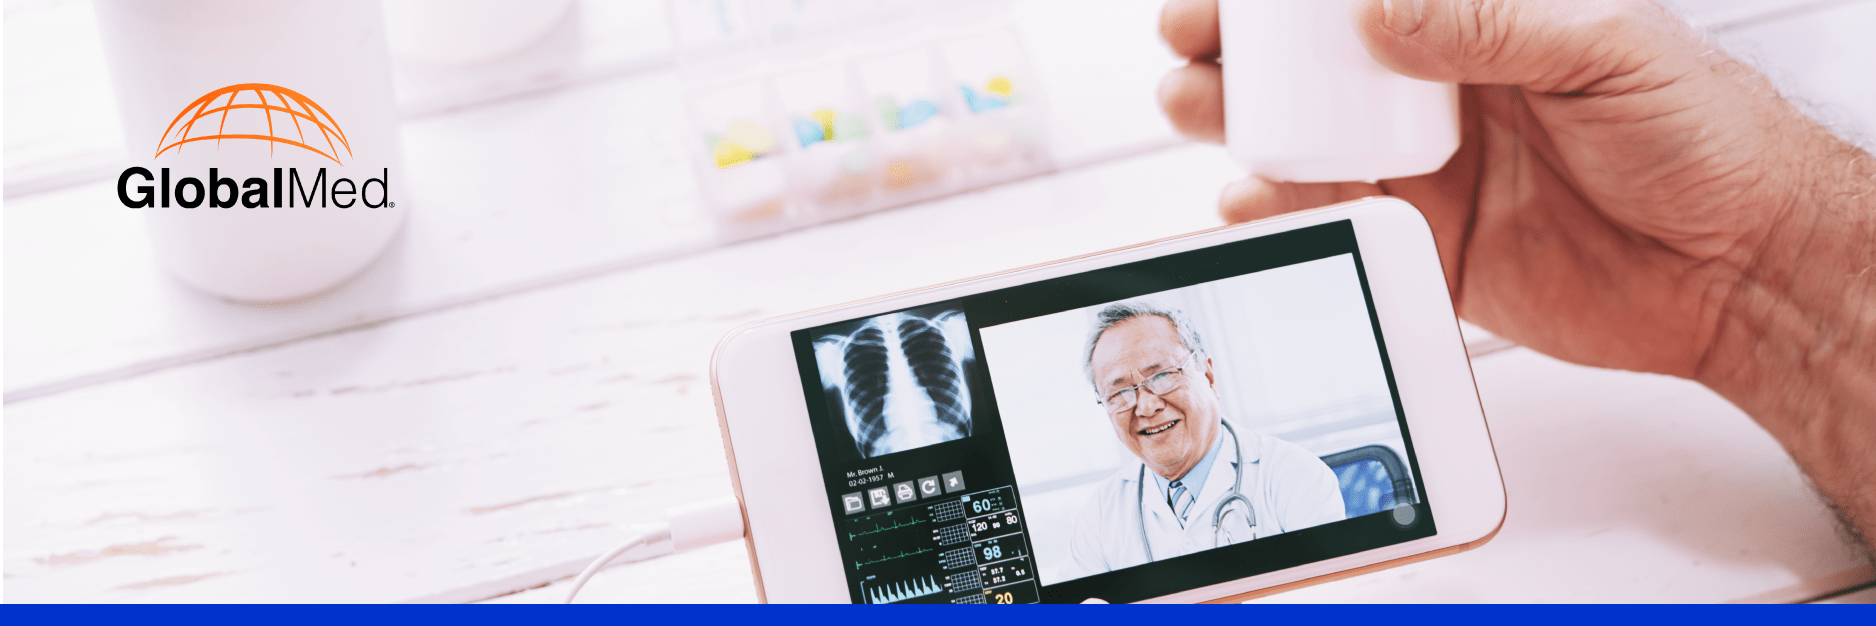 telemedicine visit with a doctor using a smart phone